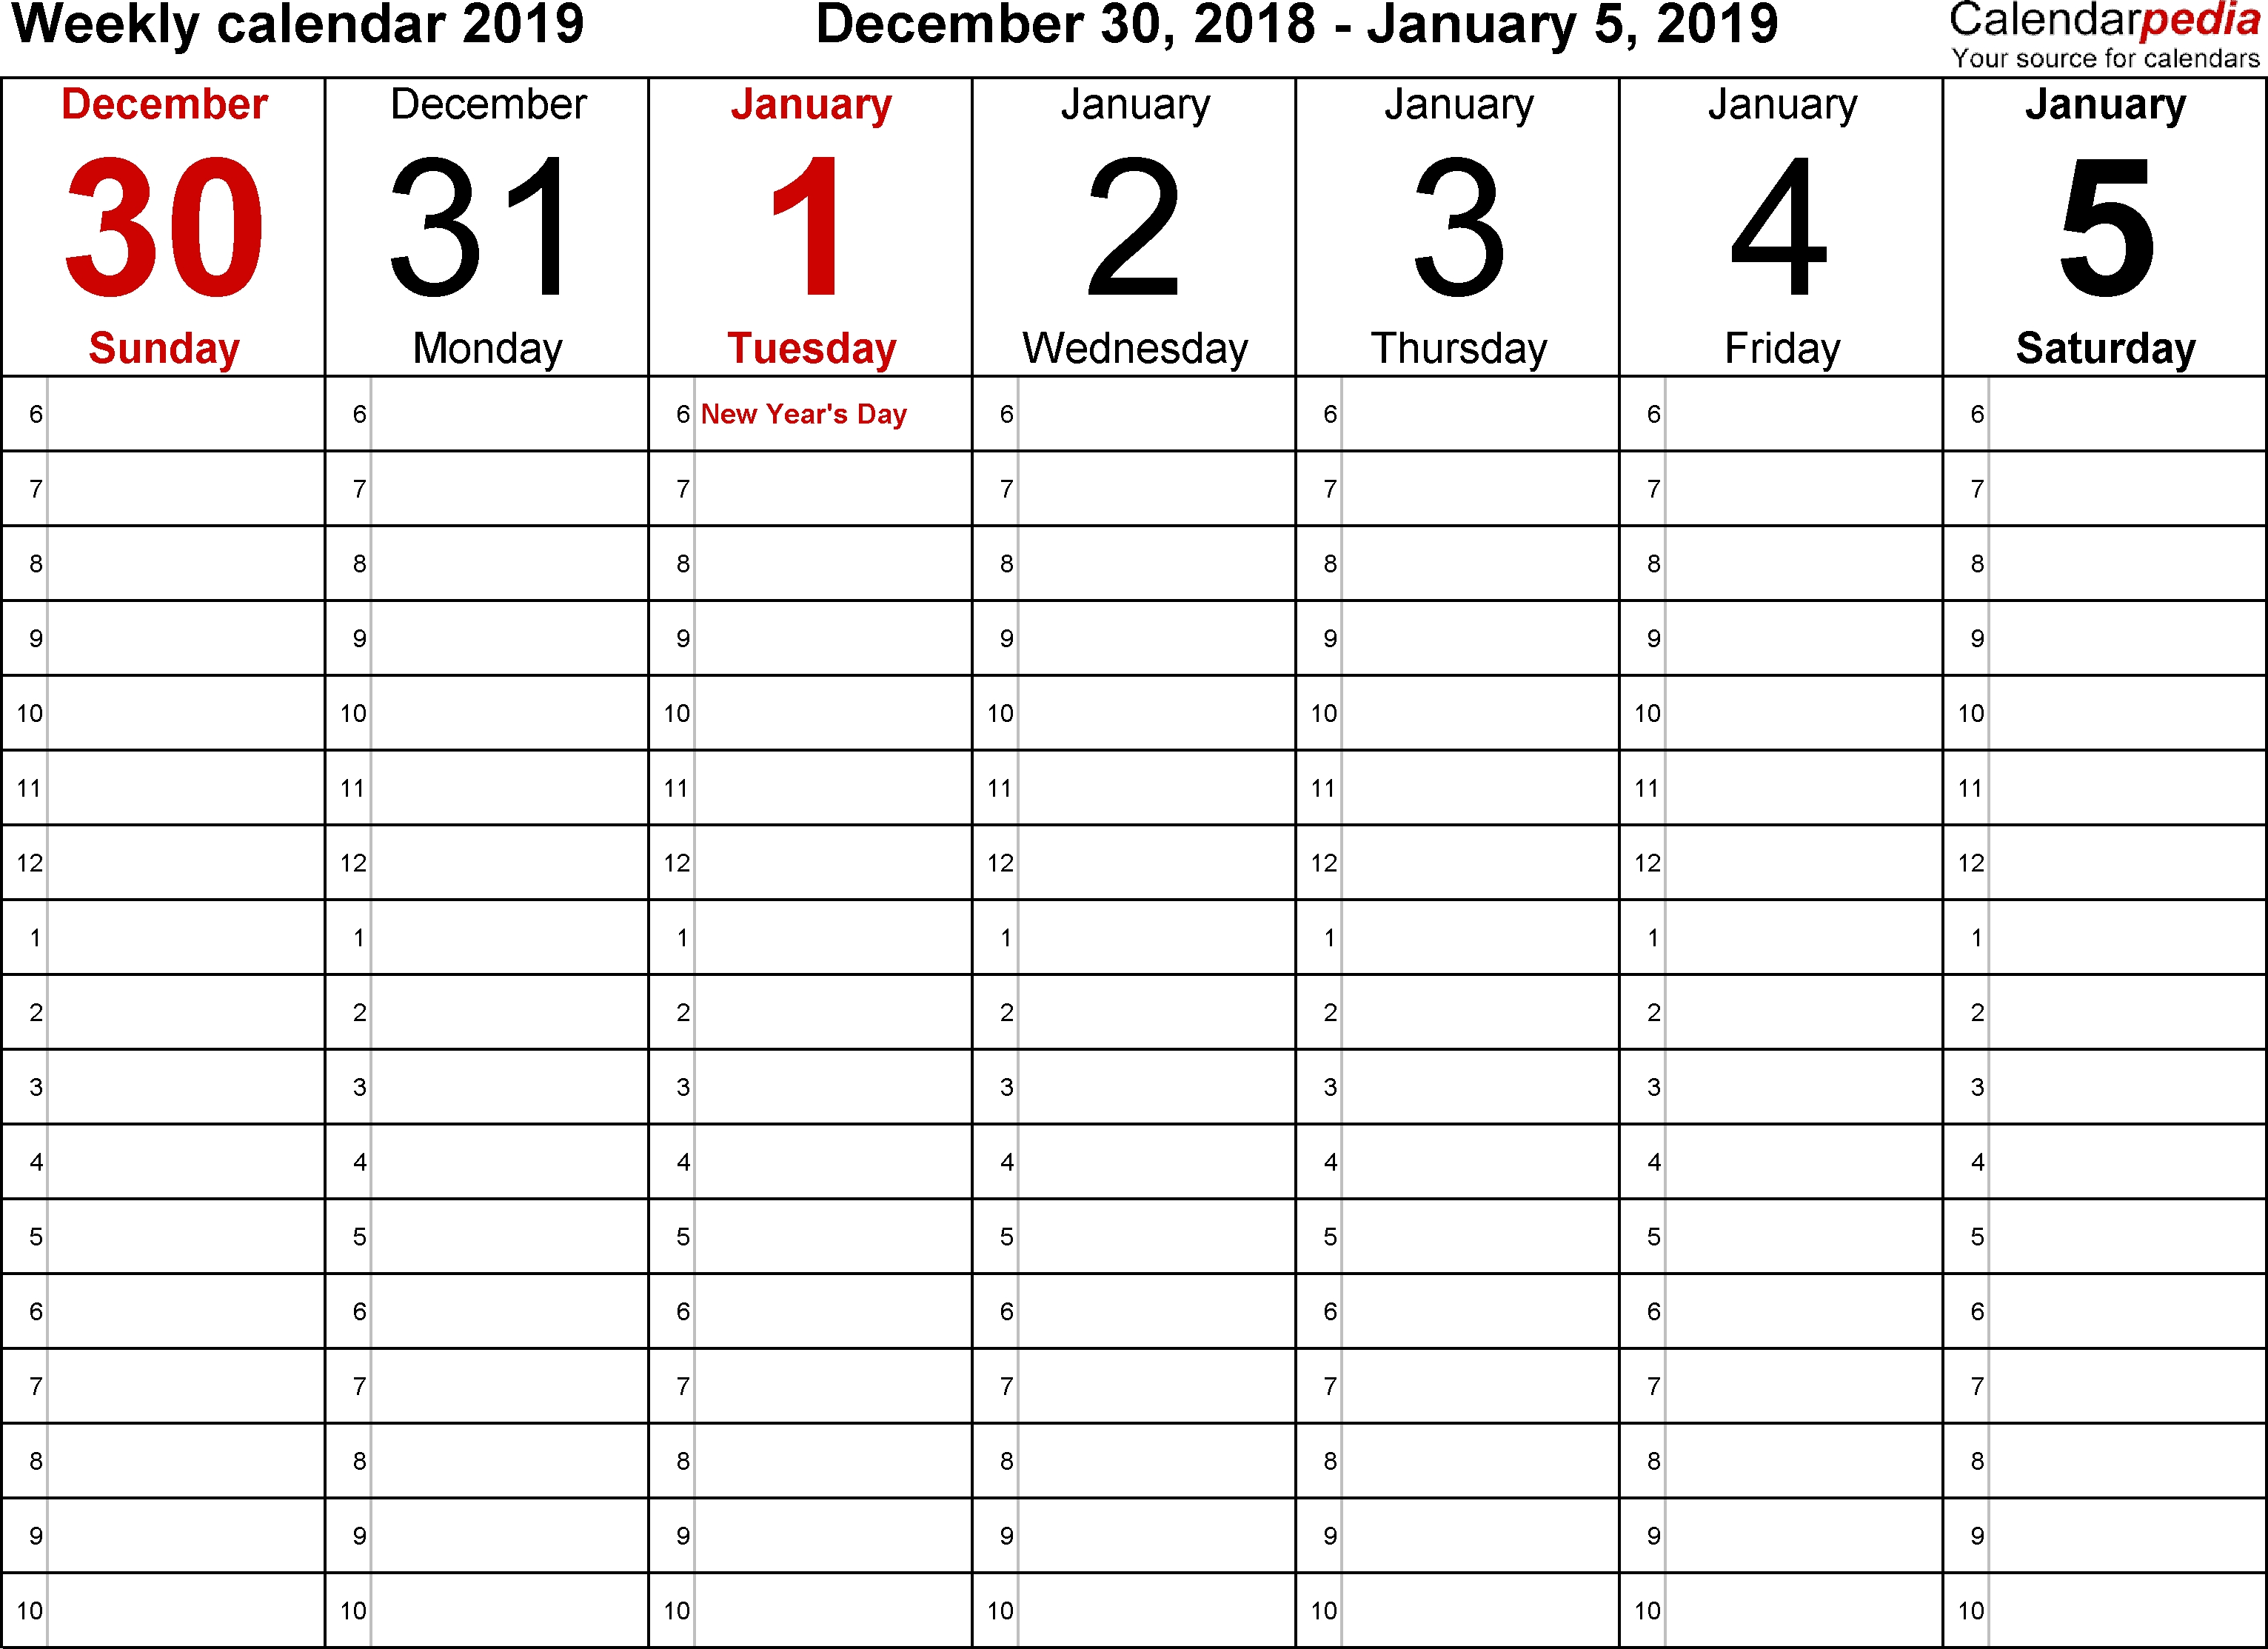 Weekly Calendar 2019 For Word - 12 Free Printable Templates 1/2 Page Calendar Template